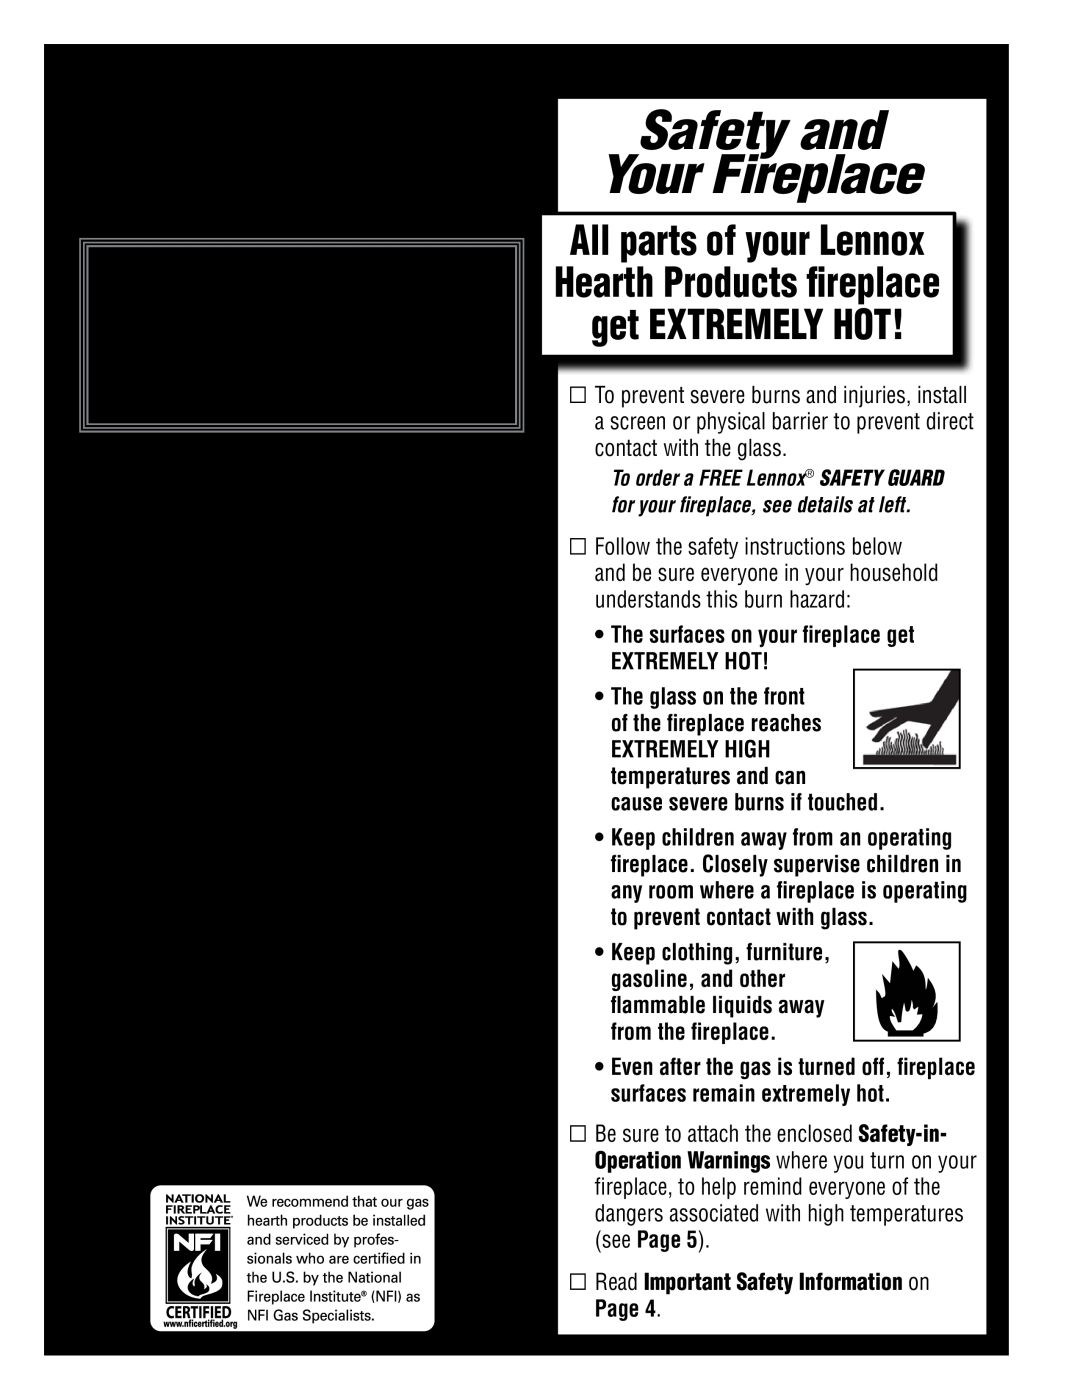 Lennox Hearth LSM40ST-N, LSM40ST-P Safety and Your Fireplace, Free Safety Guard Offer, Table Of Contents 